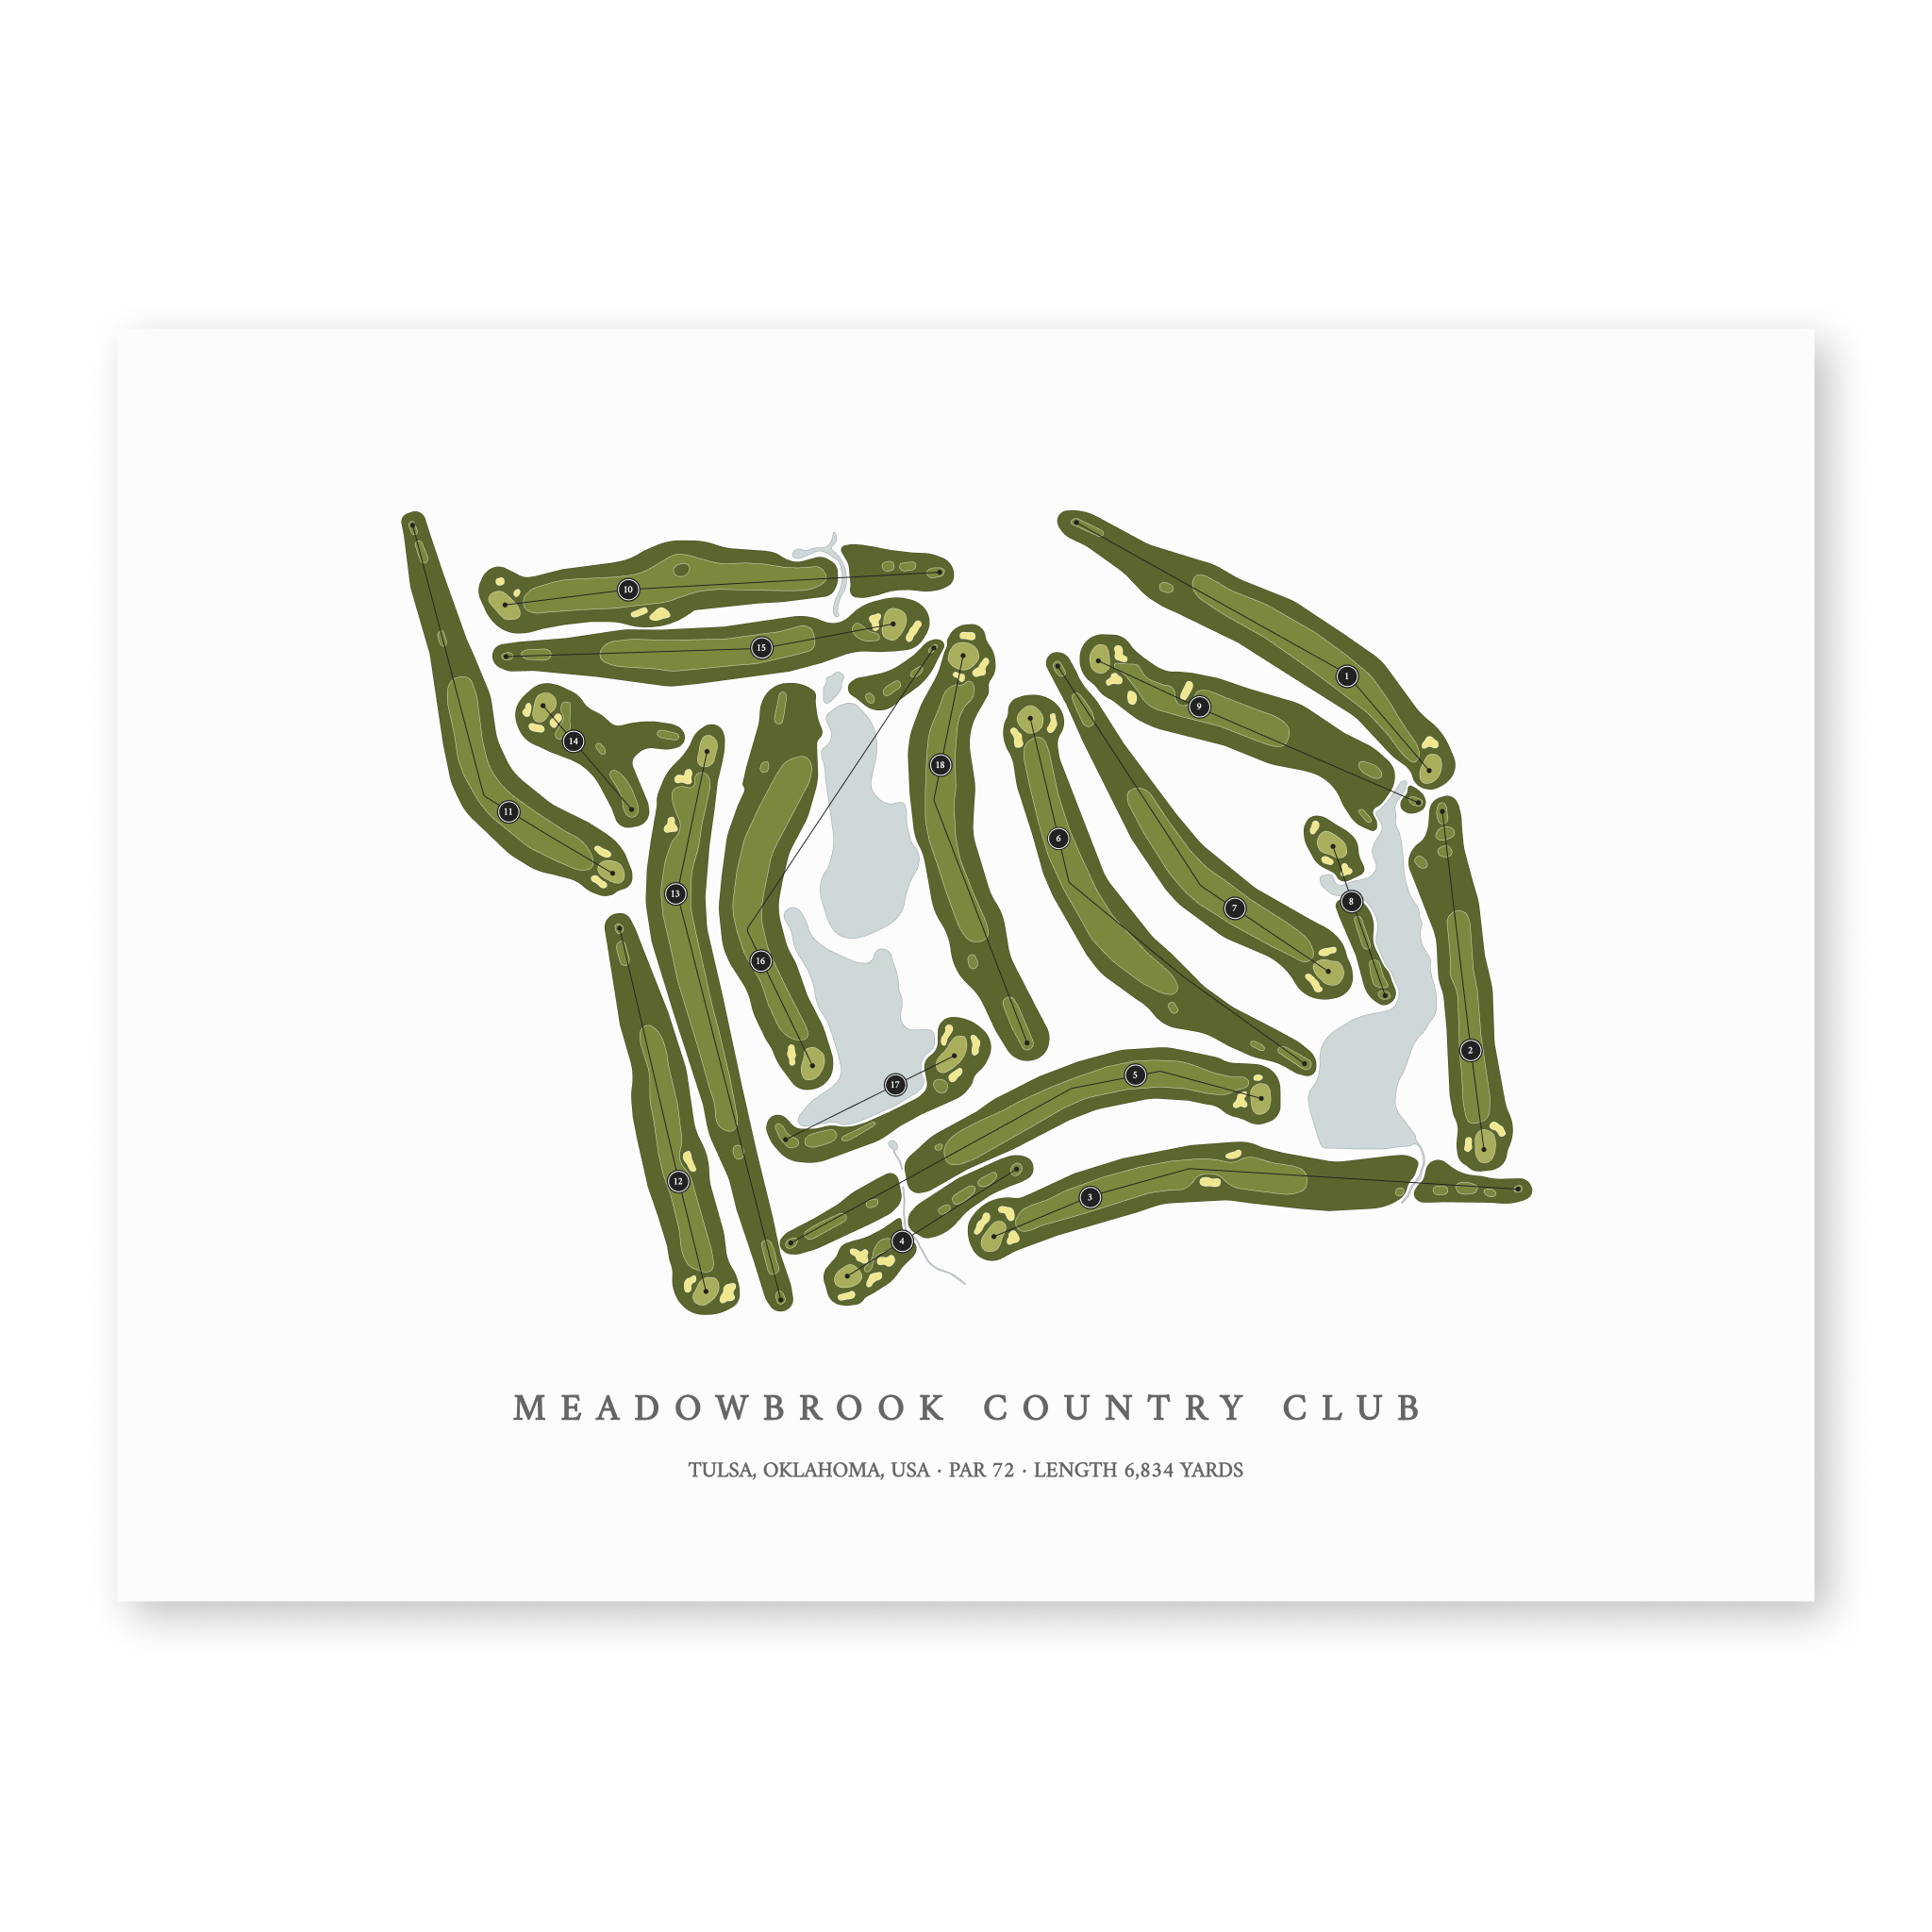 Meadowbrook Country Club | Golf Course Map | Unframed With Hole Numbers #hole numbers_yes